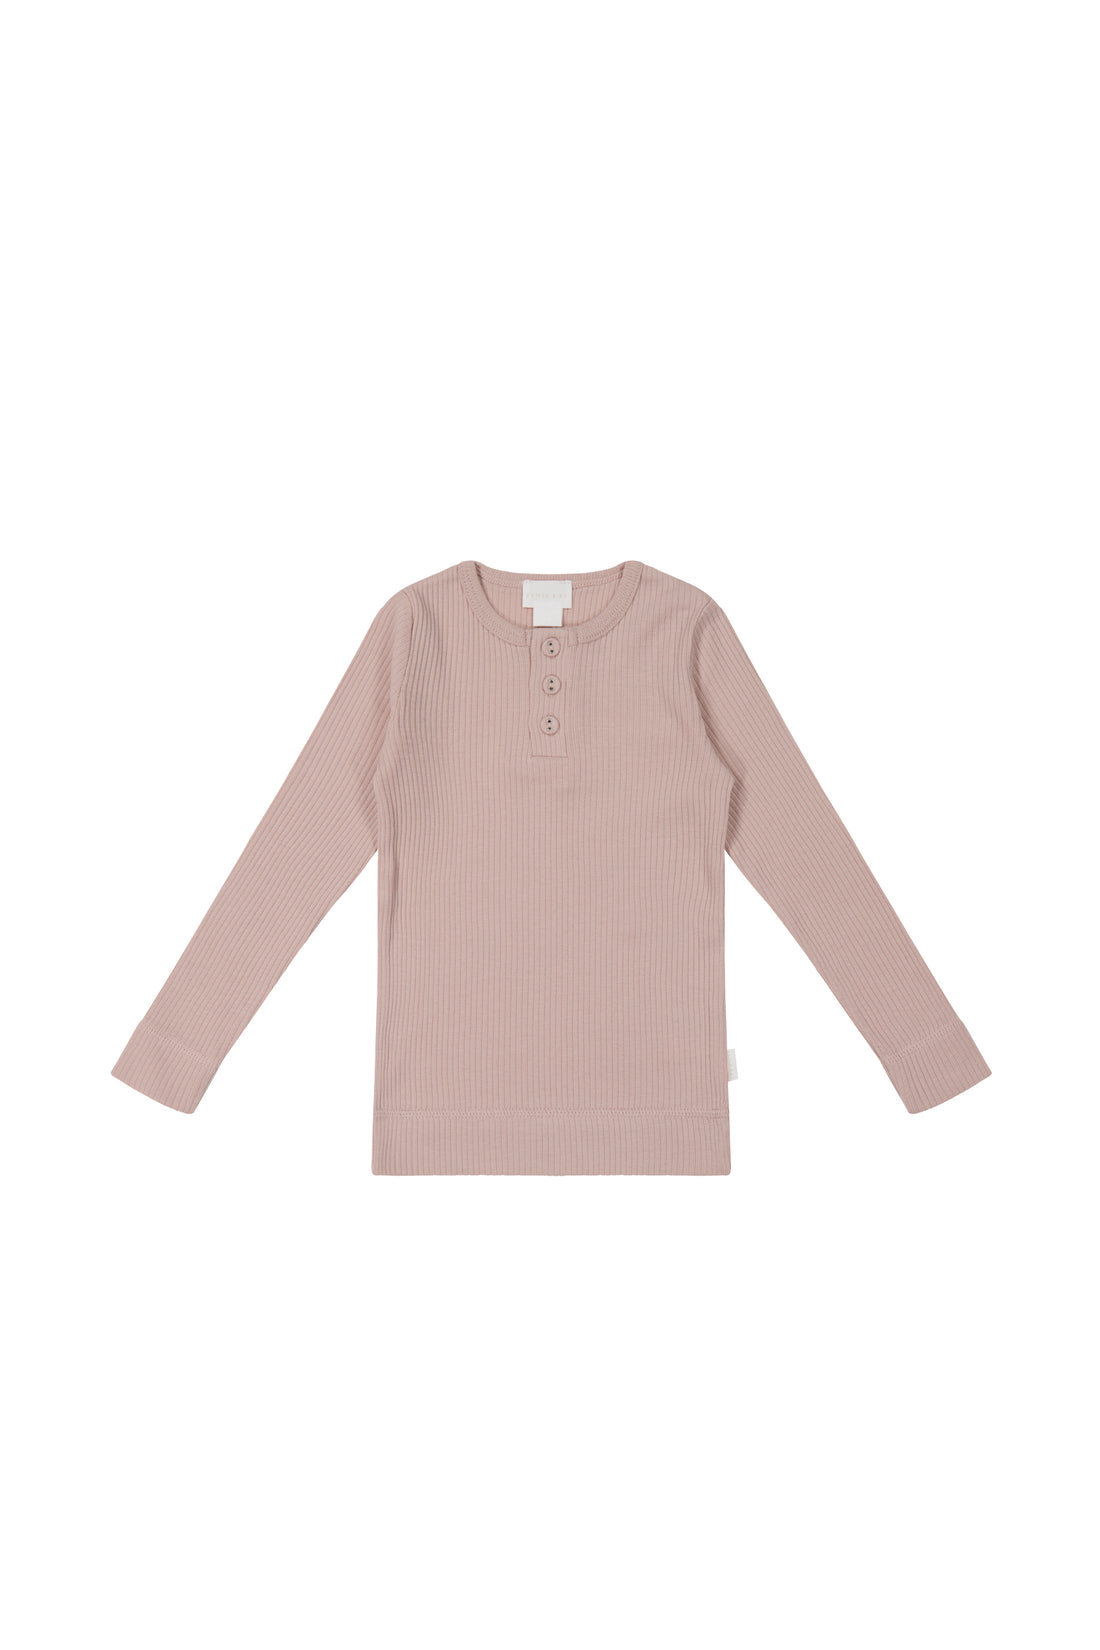 Organic Cotton Modal Long Sleeve Henley - Shell Pink Childrens Top from Jamie Kay NZ